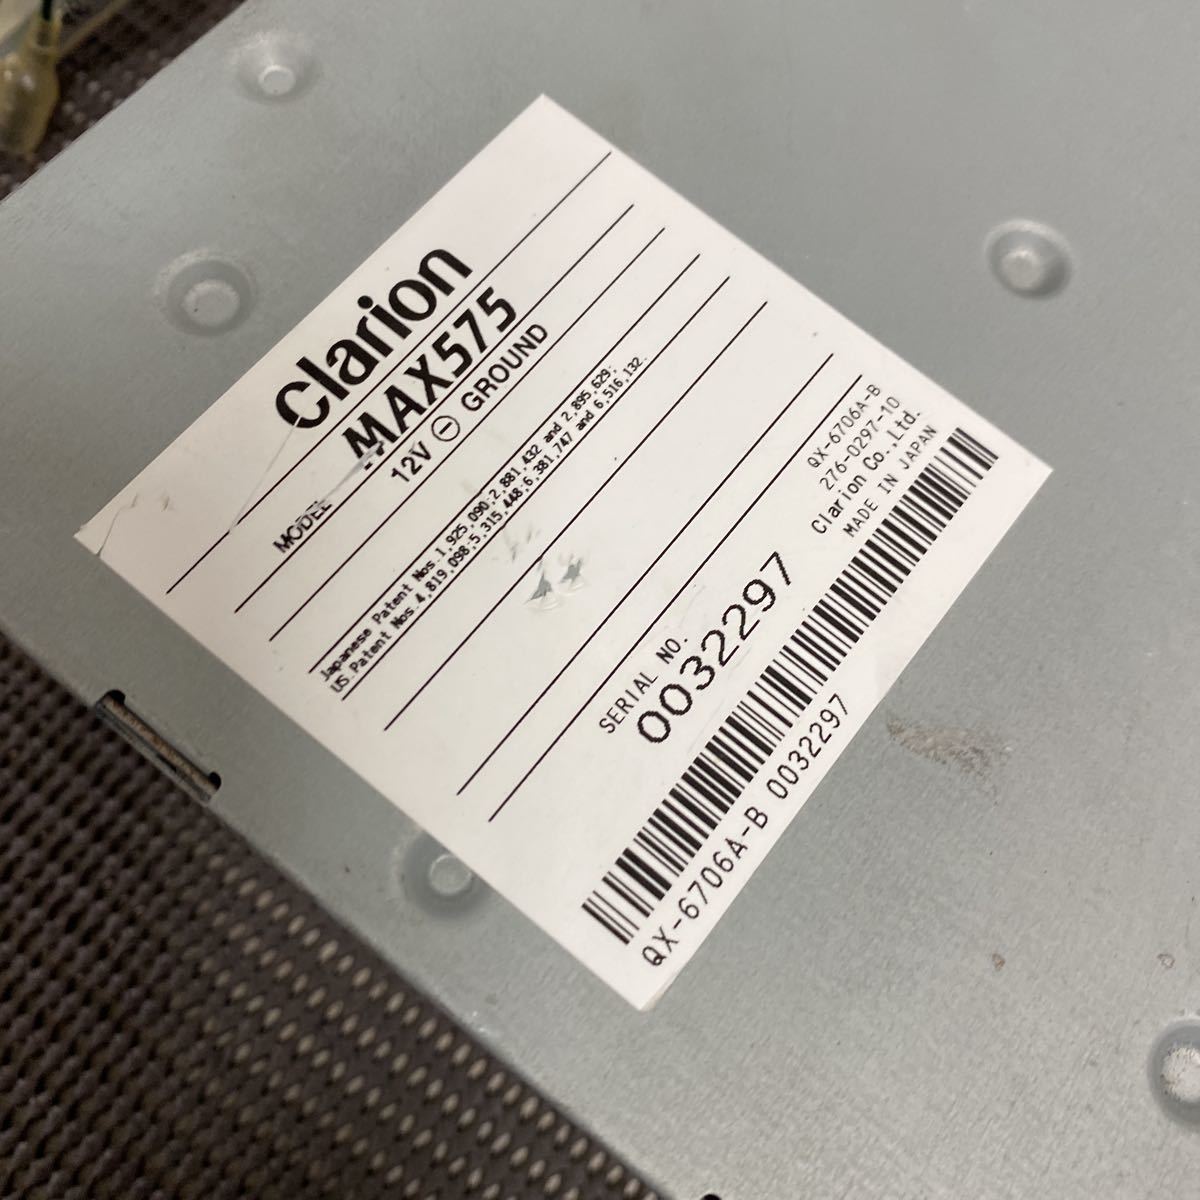 Clarion HDD navi MAX575 operation not yet verification Junk 